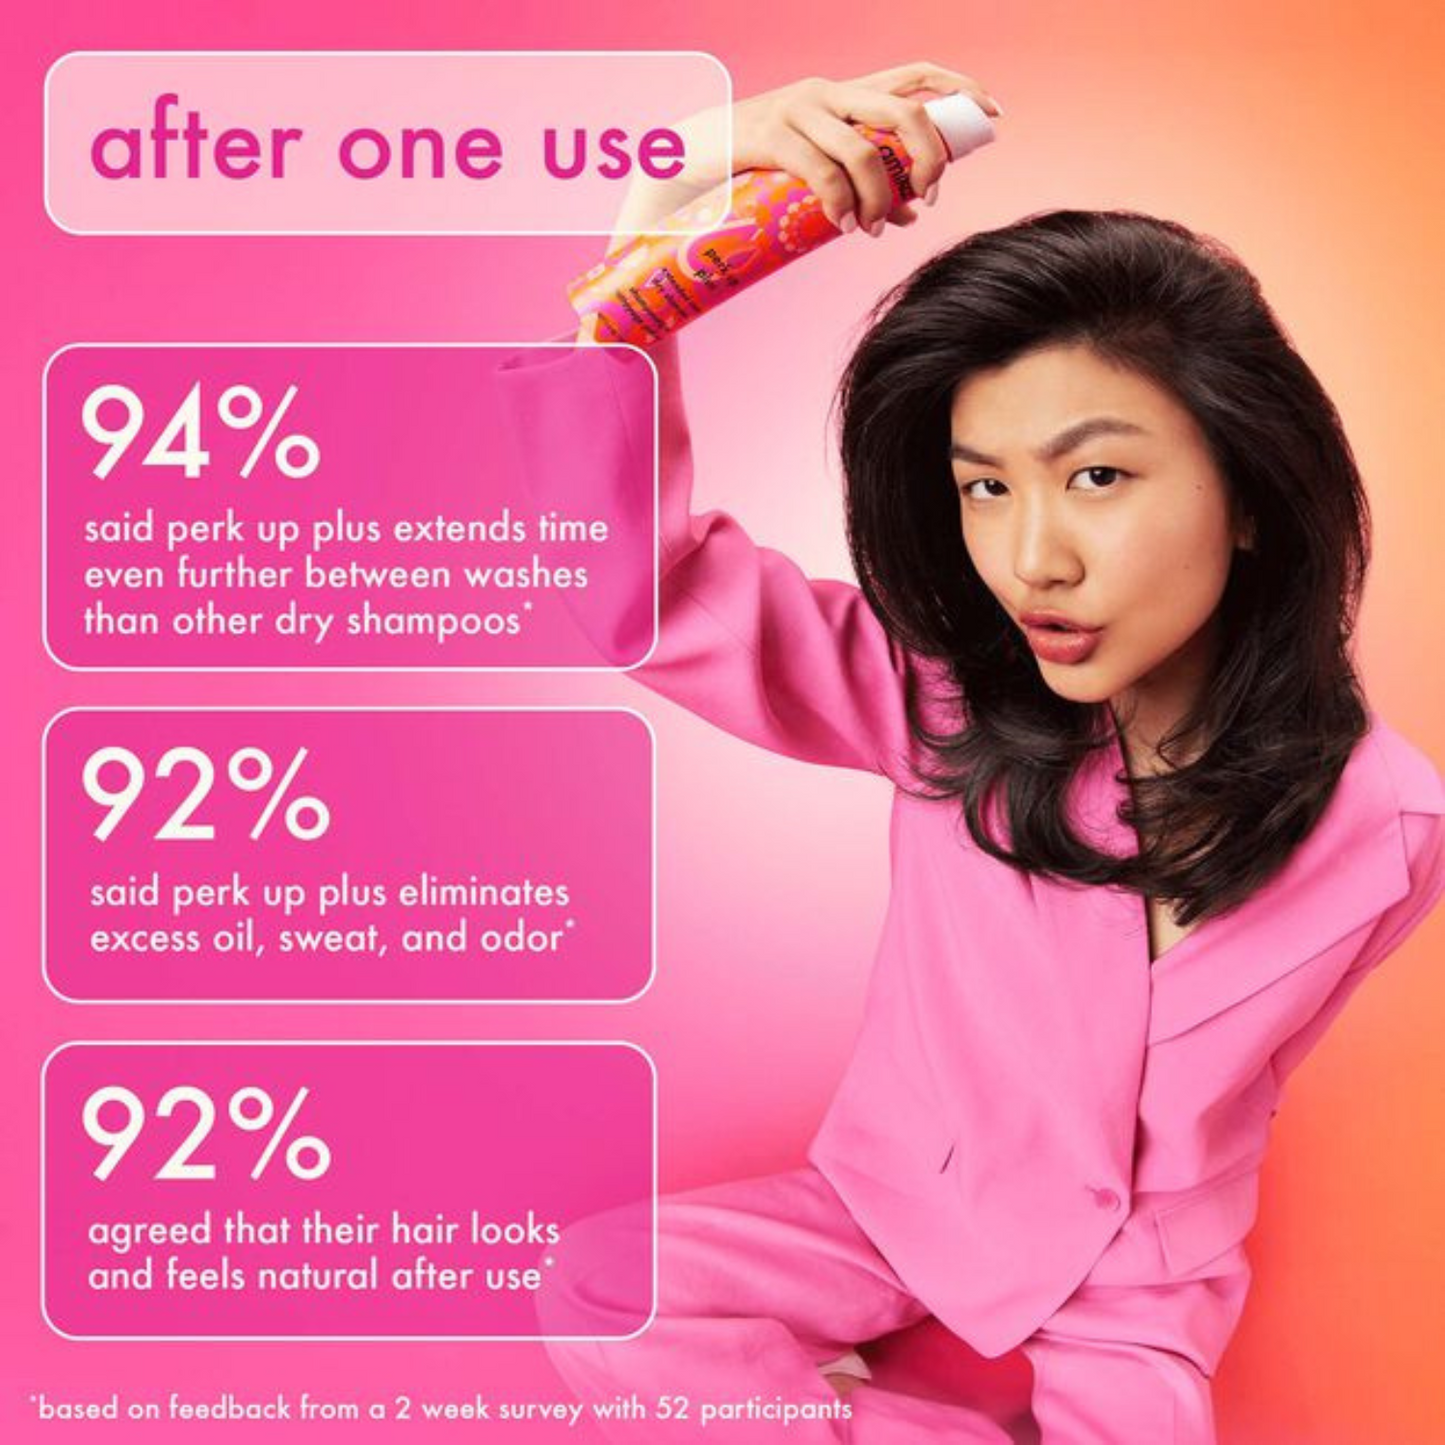 amika - Perk Up Plus Extended Clean Dry Shampoo